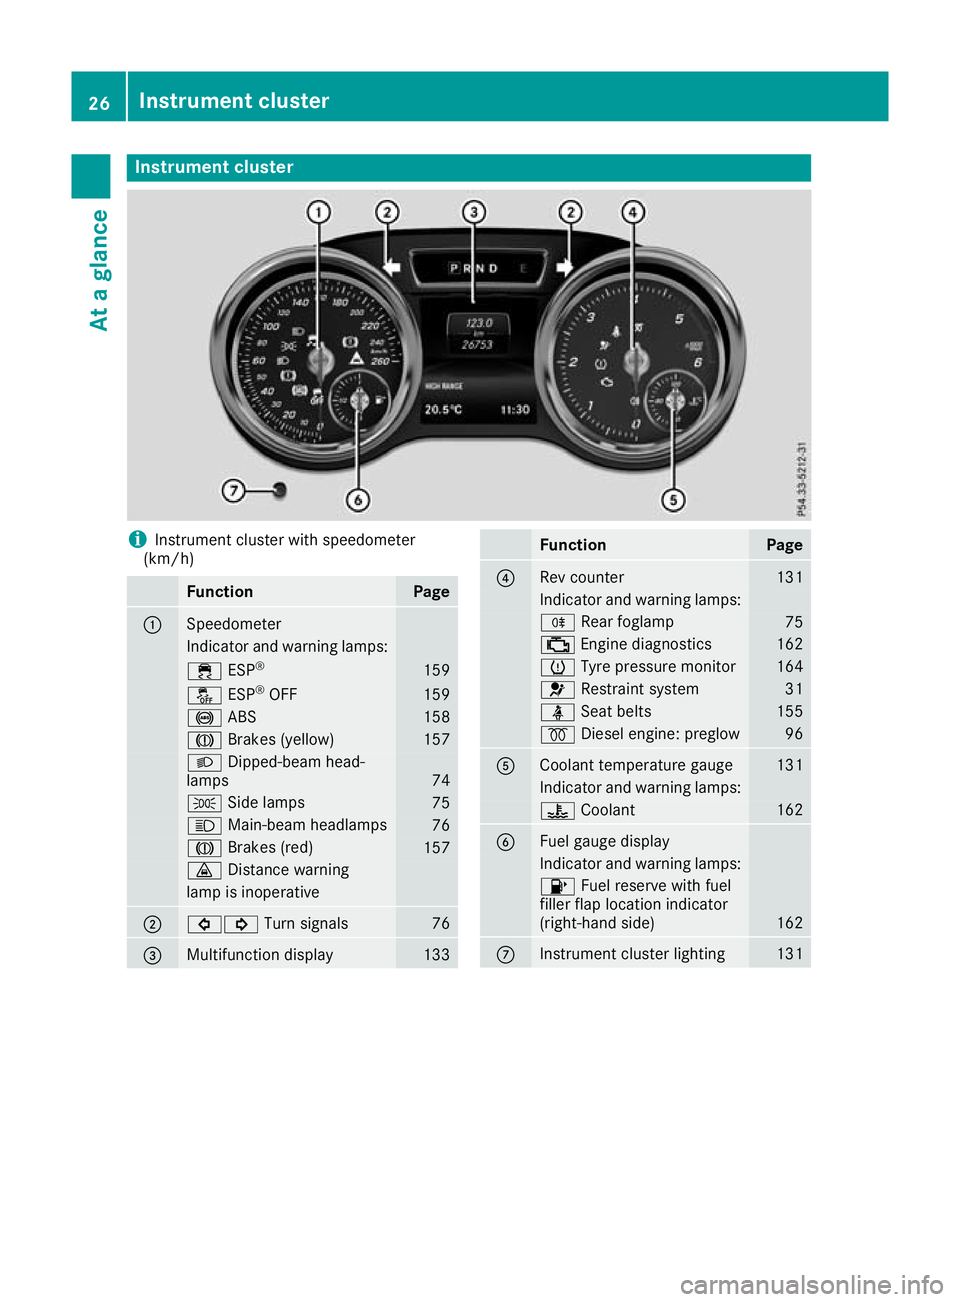 MERCEDES-BENZ G-CLASS SUV 2016  Owners Manual Instrumen
tcluster i
Instrument cluste
rwith speedometer
(km/h) Function Page
:
Speedometer
Indicator and warning lamps:
÷
ESP® 159
å
ESP®
OFF 159
!
ABS 158
J
Brakes (yellow) 157
L
Dipped-bea mhea